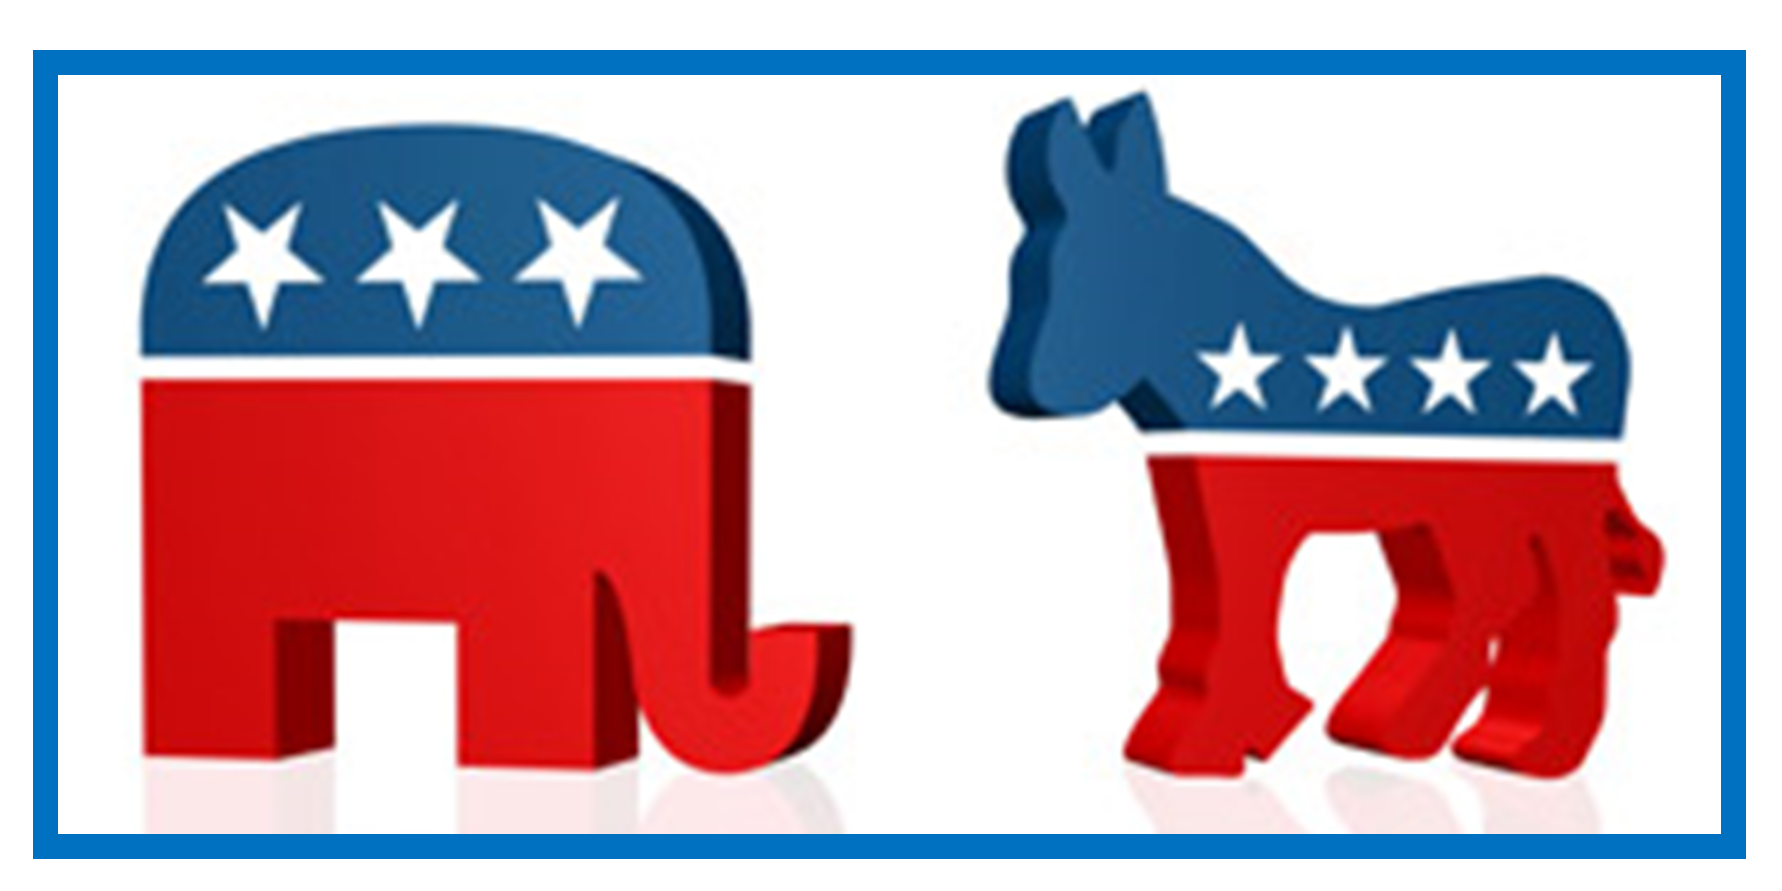 Symbols of the two major political parties in the U.S.--an elephant and a donkey